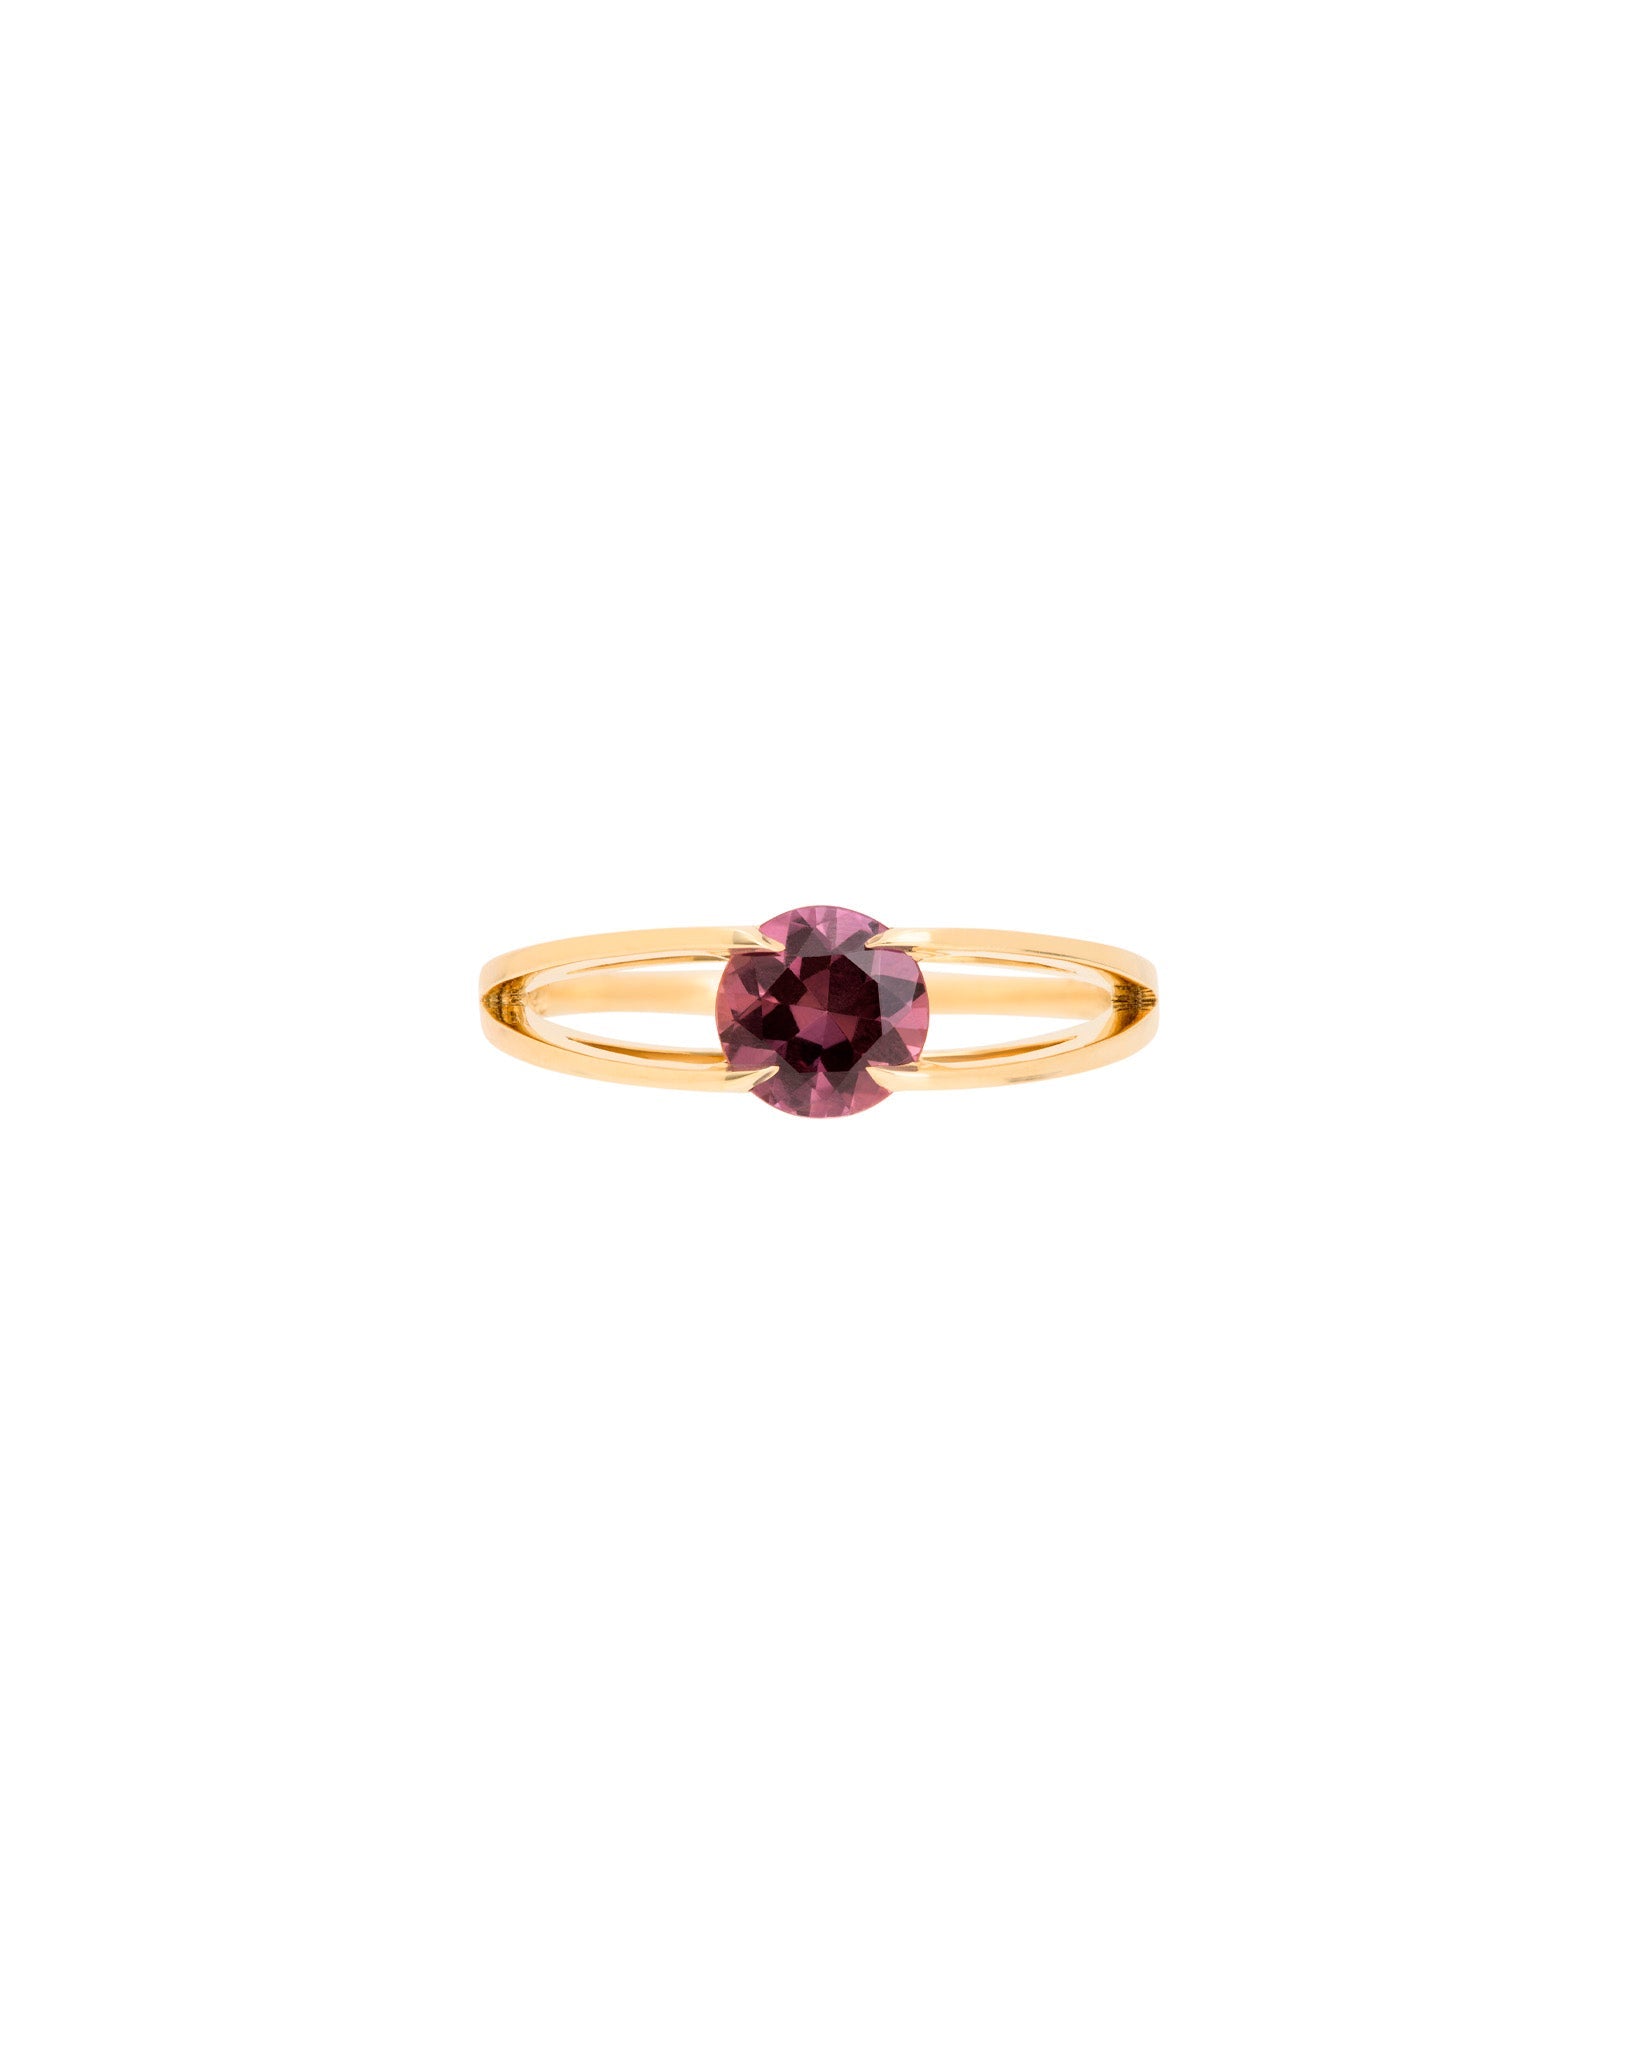 Centered Ring by Bliss Lau, is a gold band with a circular center stone